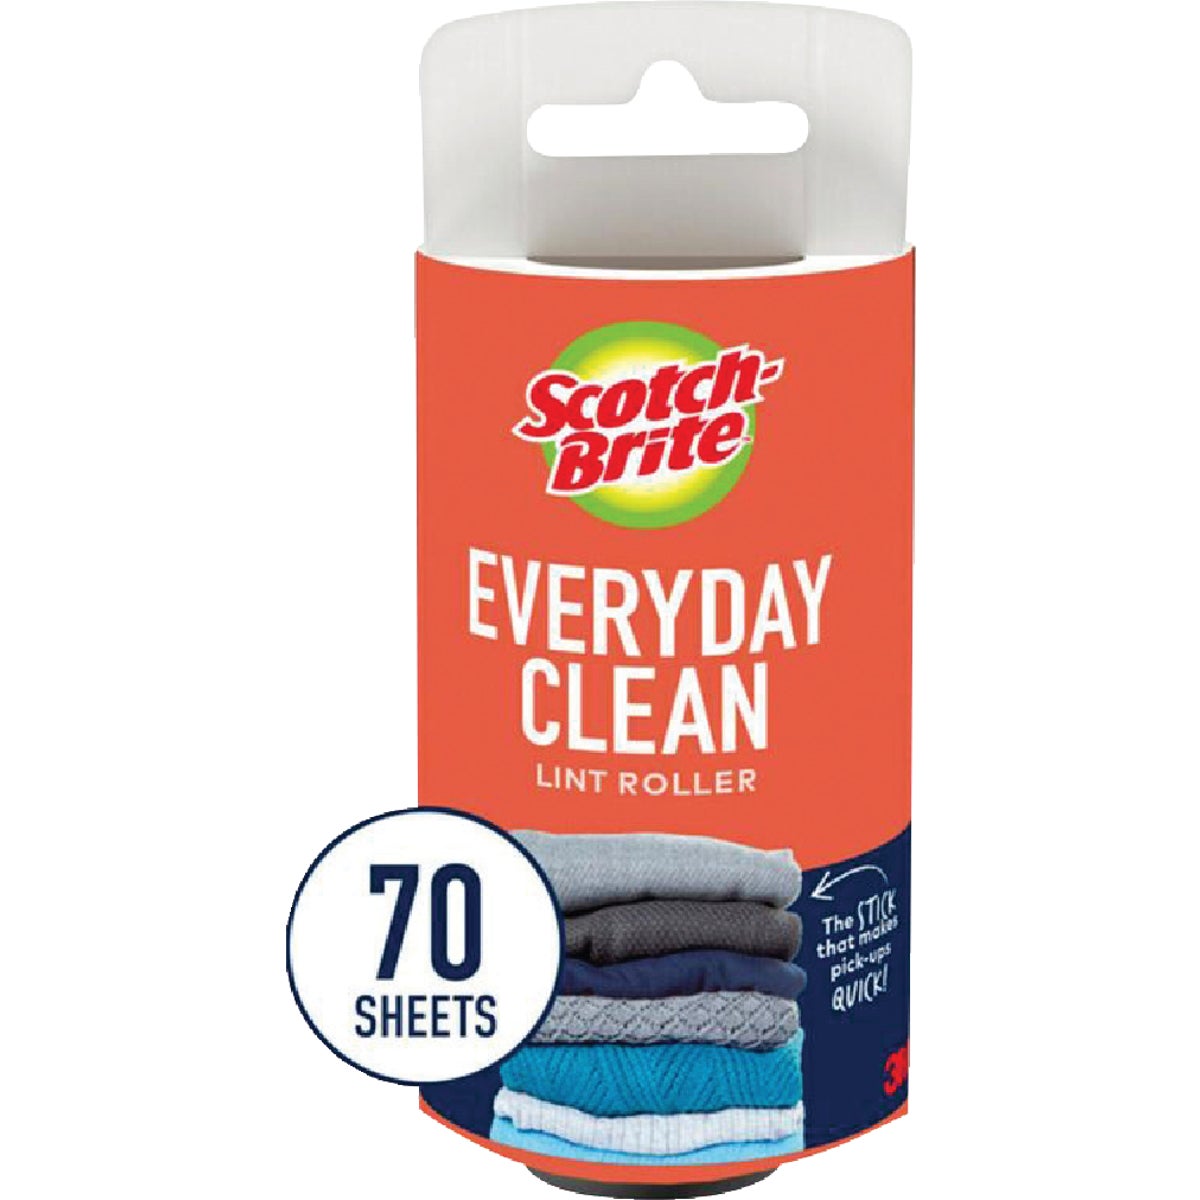 Item 629650, Look fabulous from day until night with the Scotch Brite Everday Clean Lint